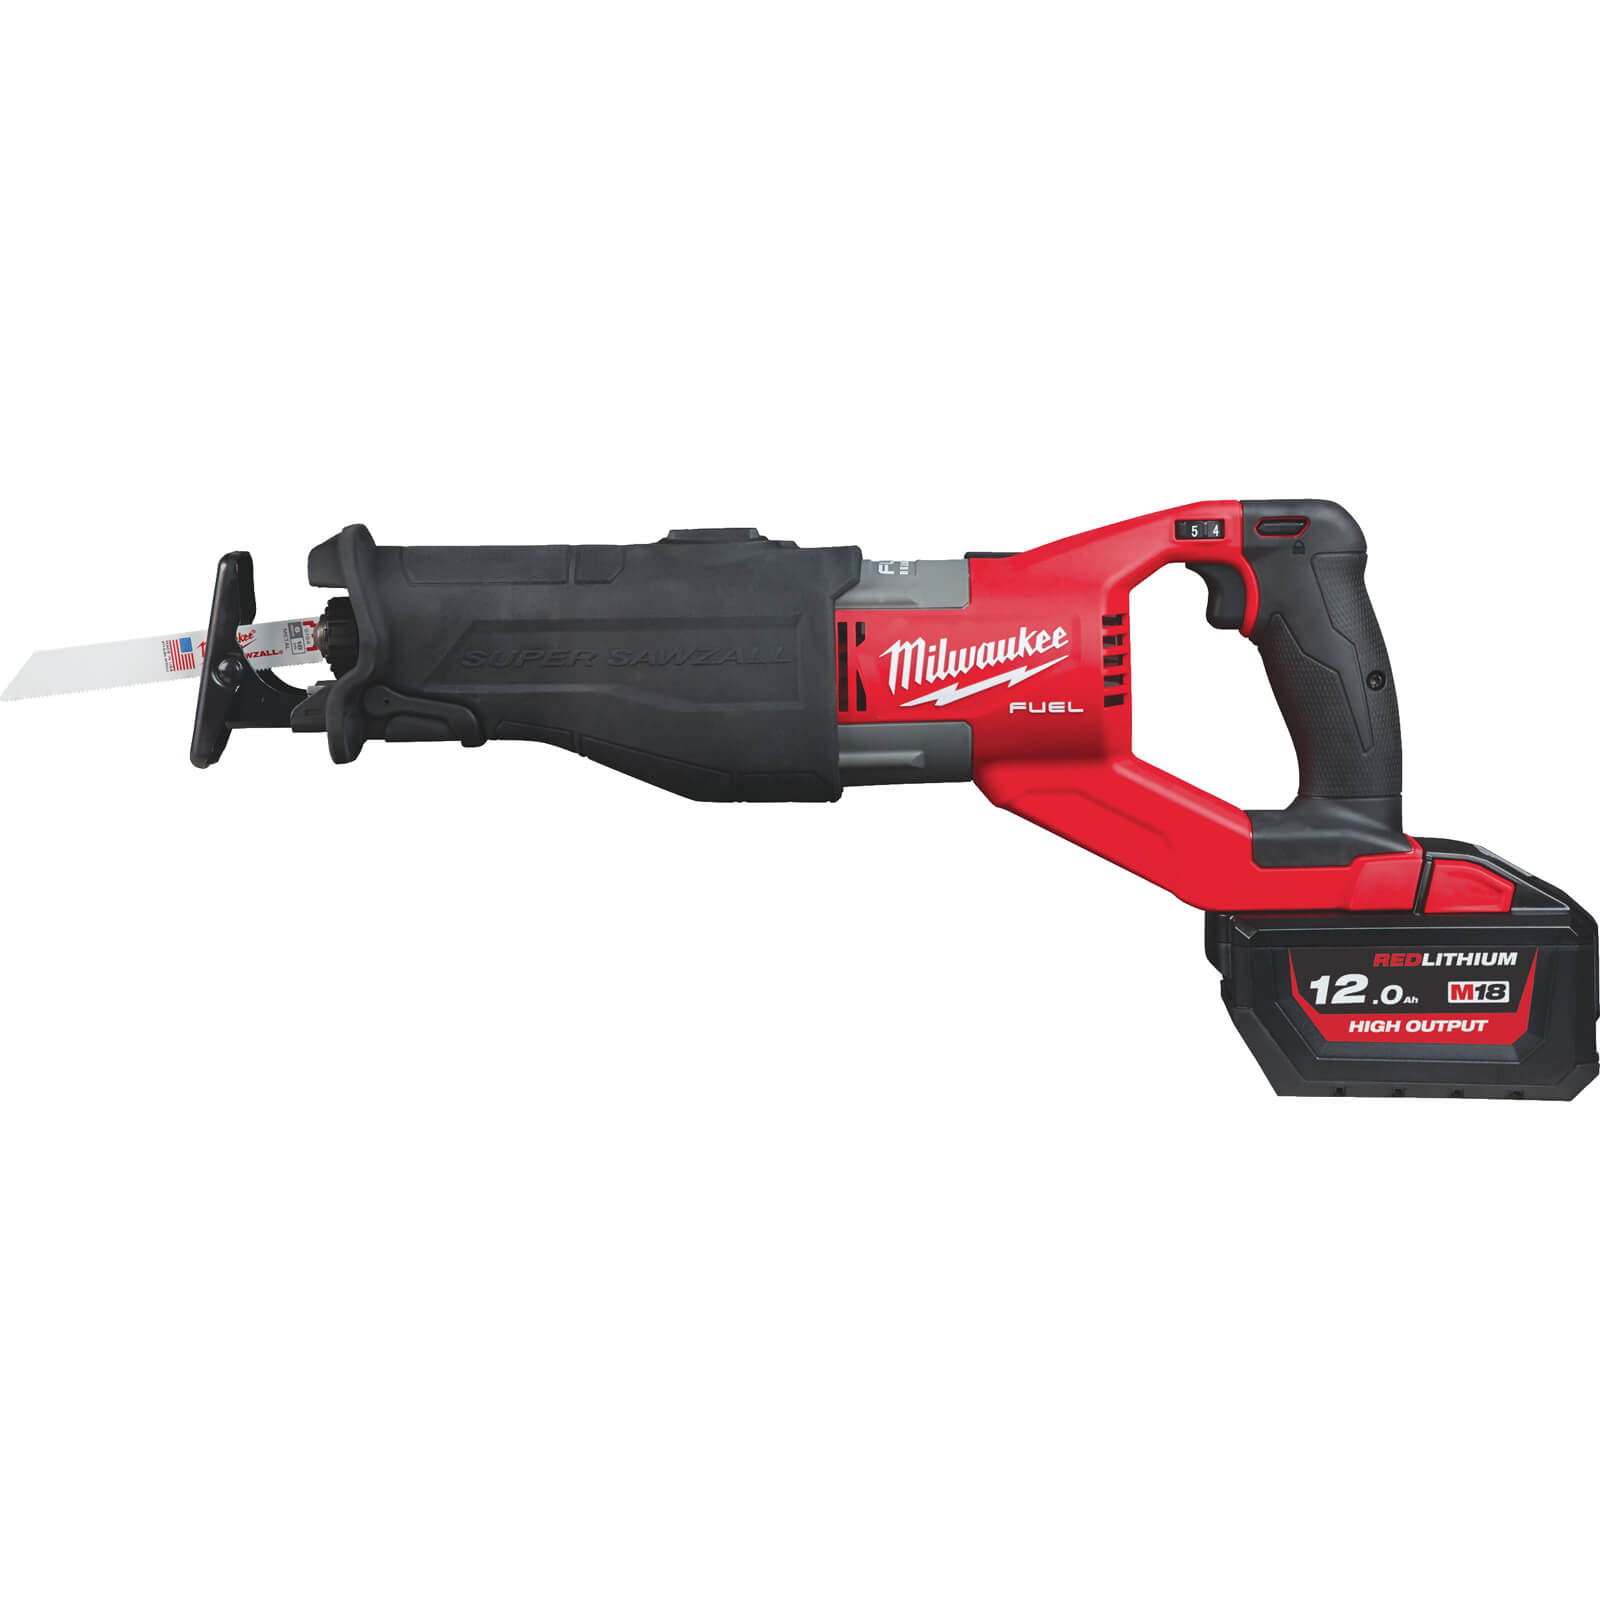 Image of Milwaukee M18 FSX Fuel 18v Cordless Brushless Super Sawzall Reciprocating Saw 1 x 12ah Li-ion Charger Case